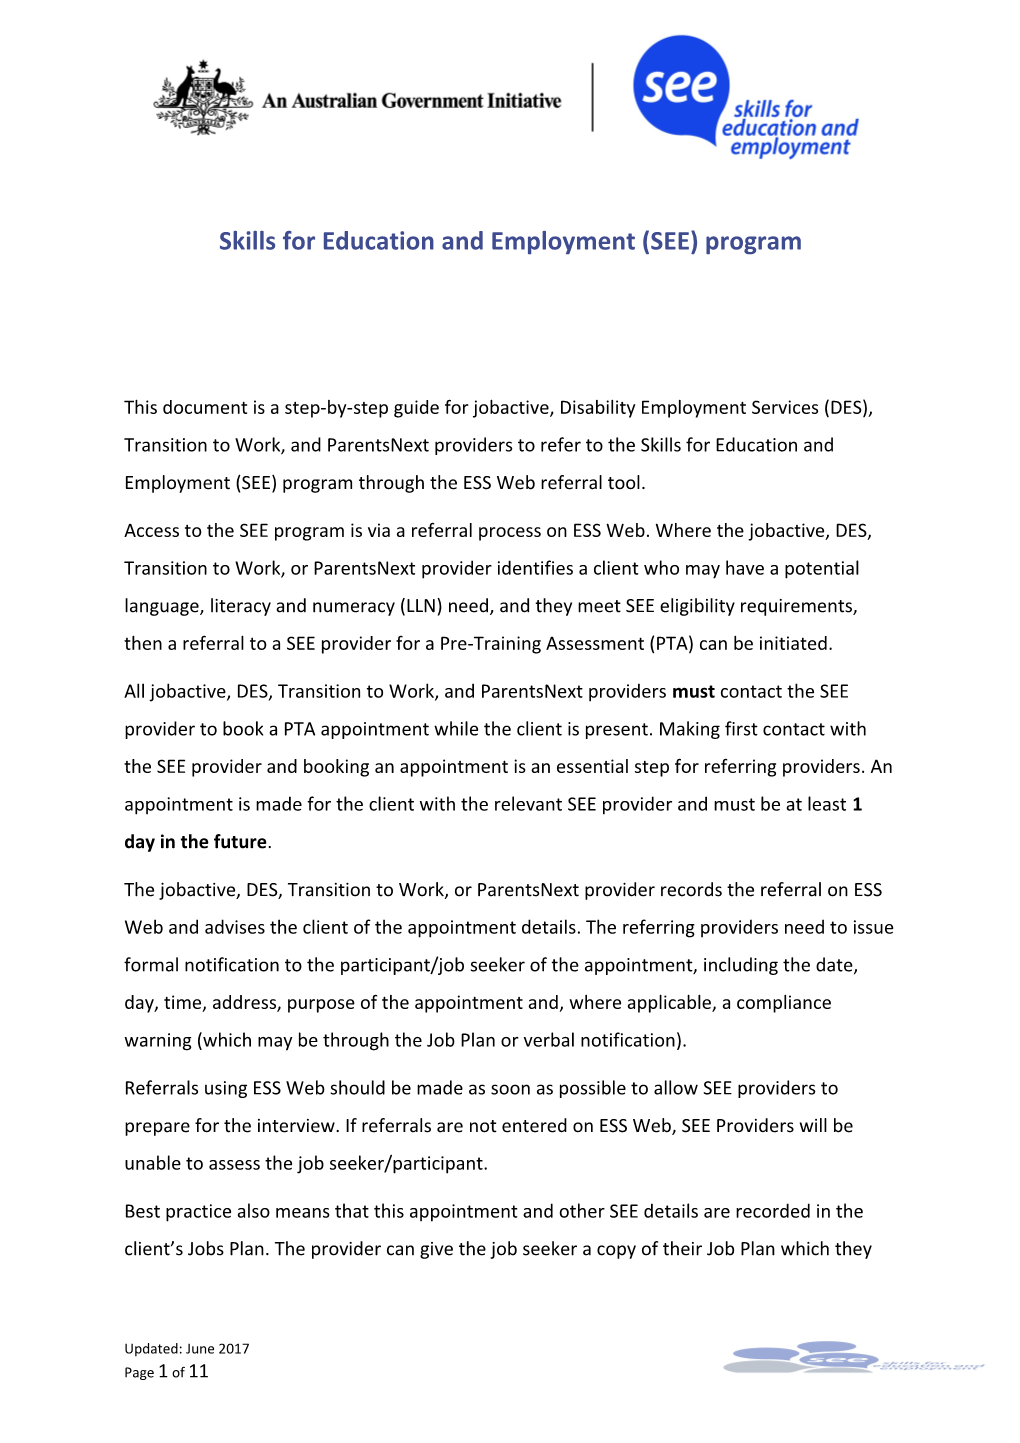 Skills for Education and Employment (SEE) Program